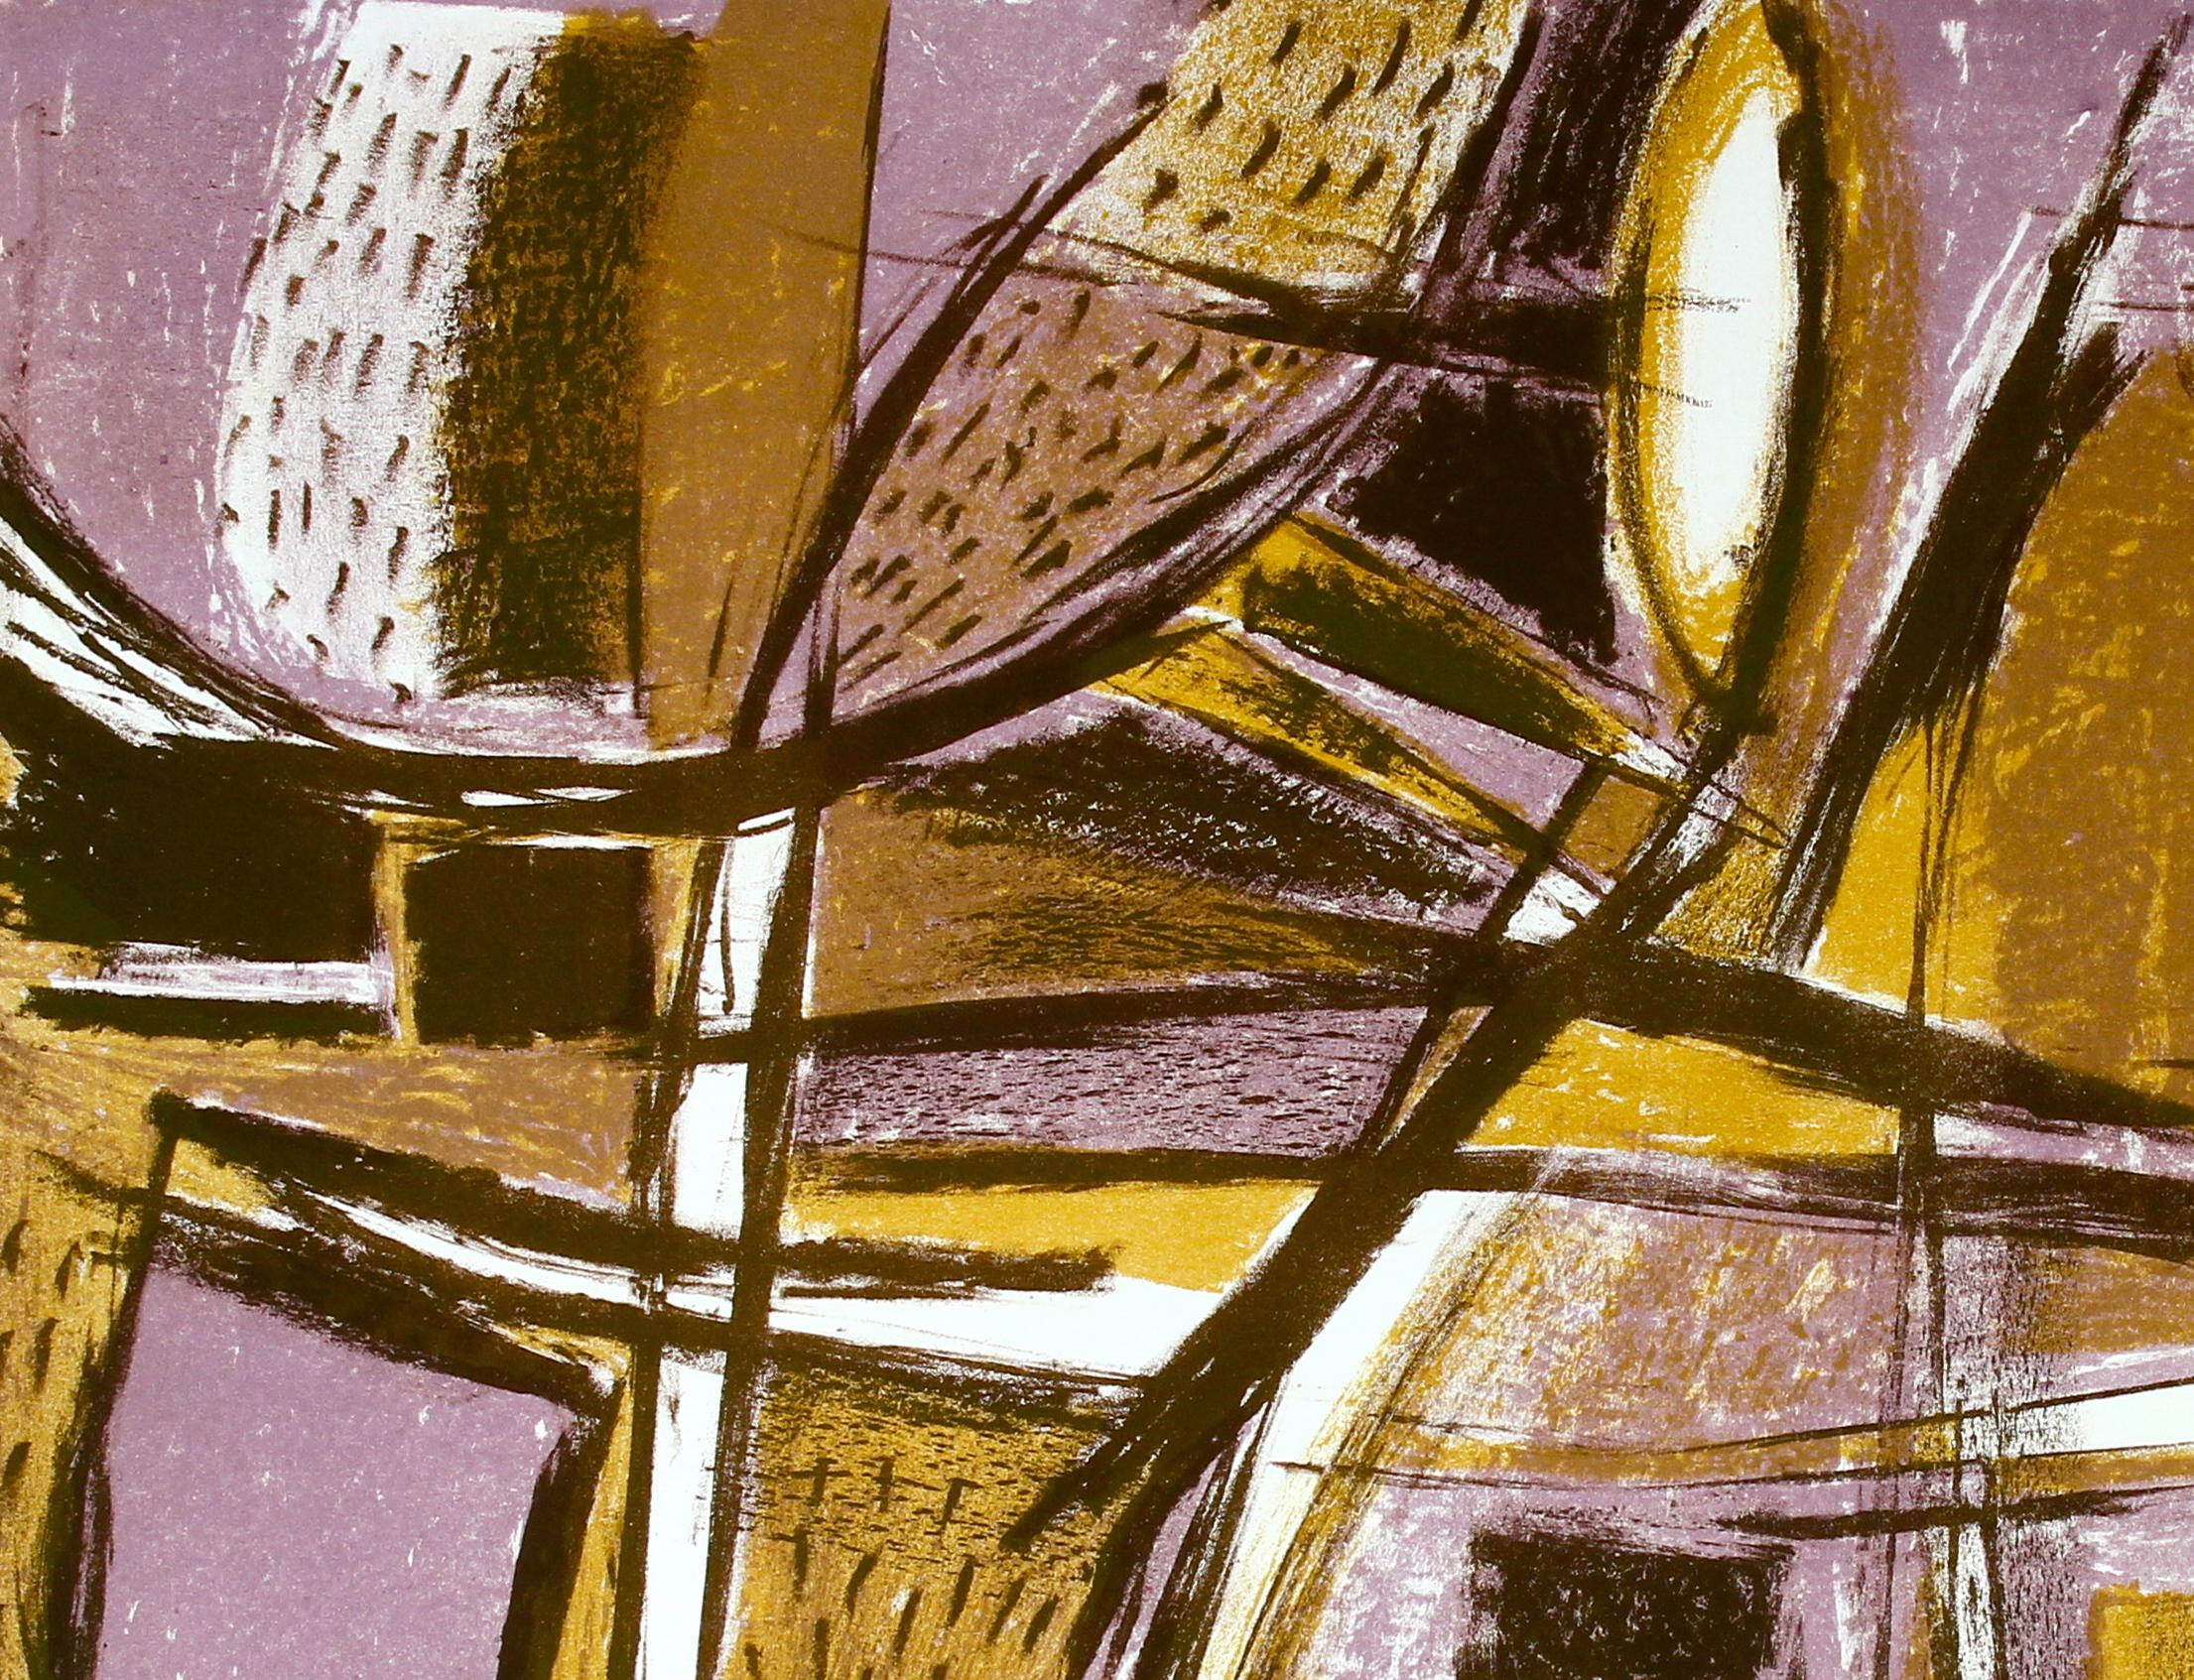 Modernist Abstract Lithograph in Lavender, Circa 1950s - Print by Jerry Opper